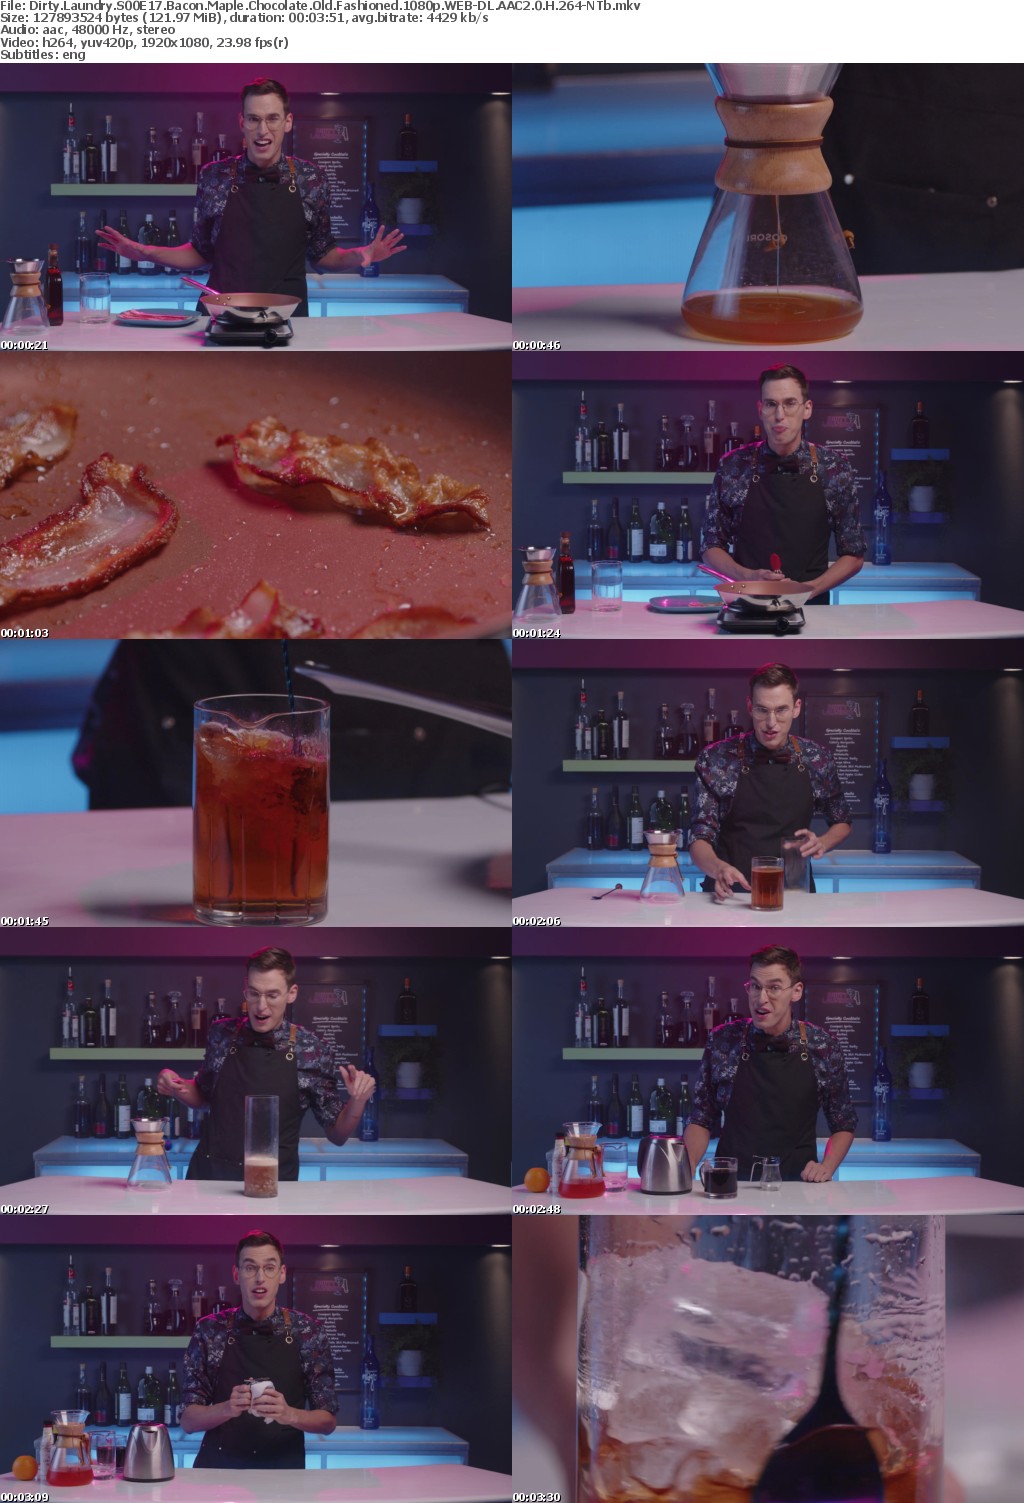 Dirty Laundry S00E17 Bacon Maple Chocolate Old Fashioned 1080p WEB-DL AAC2 0 H 264-NTb